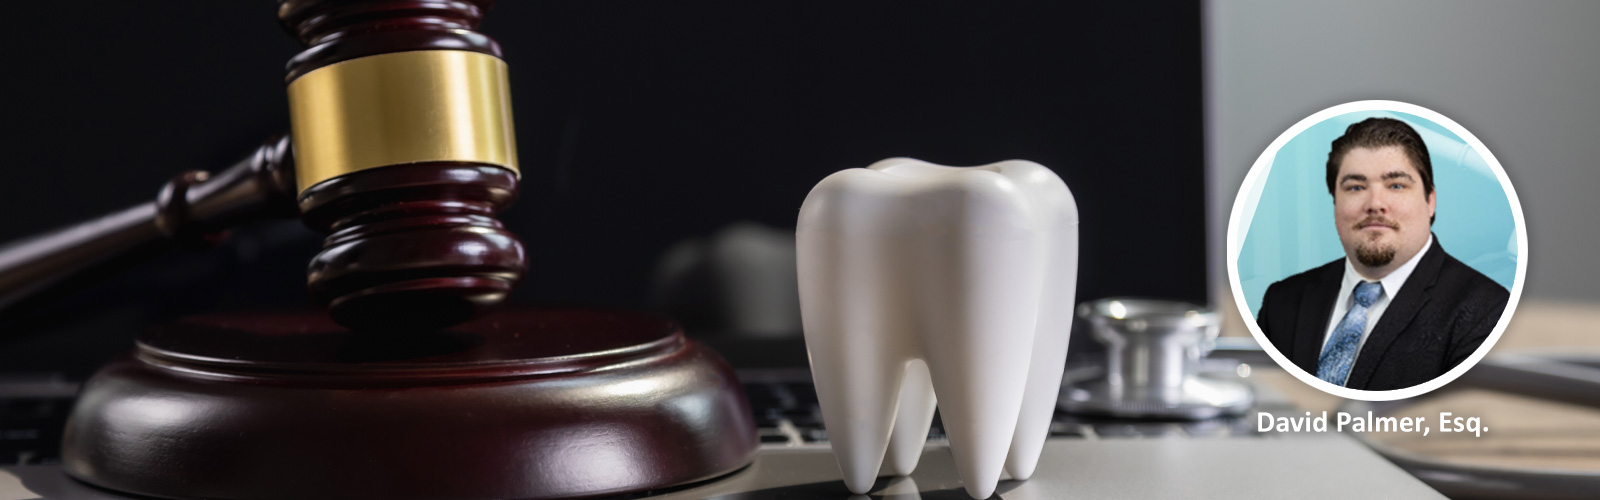 How to Avoid Common Regulation Issues as a Sedation Dentist